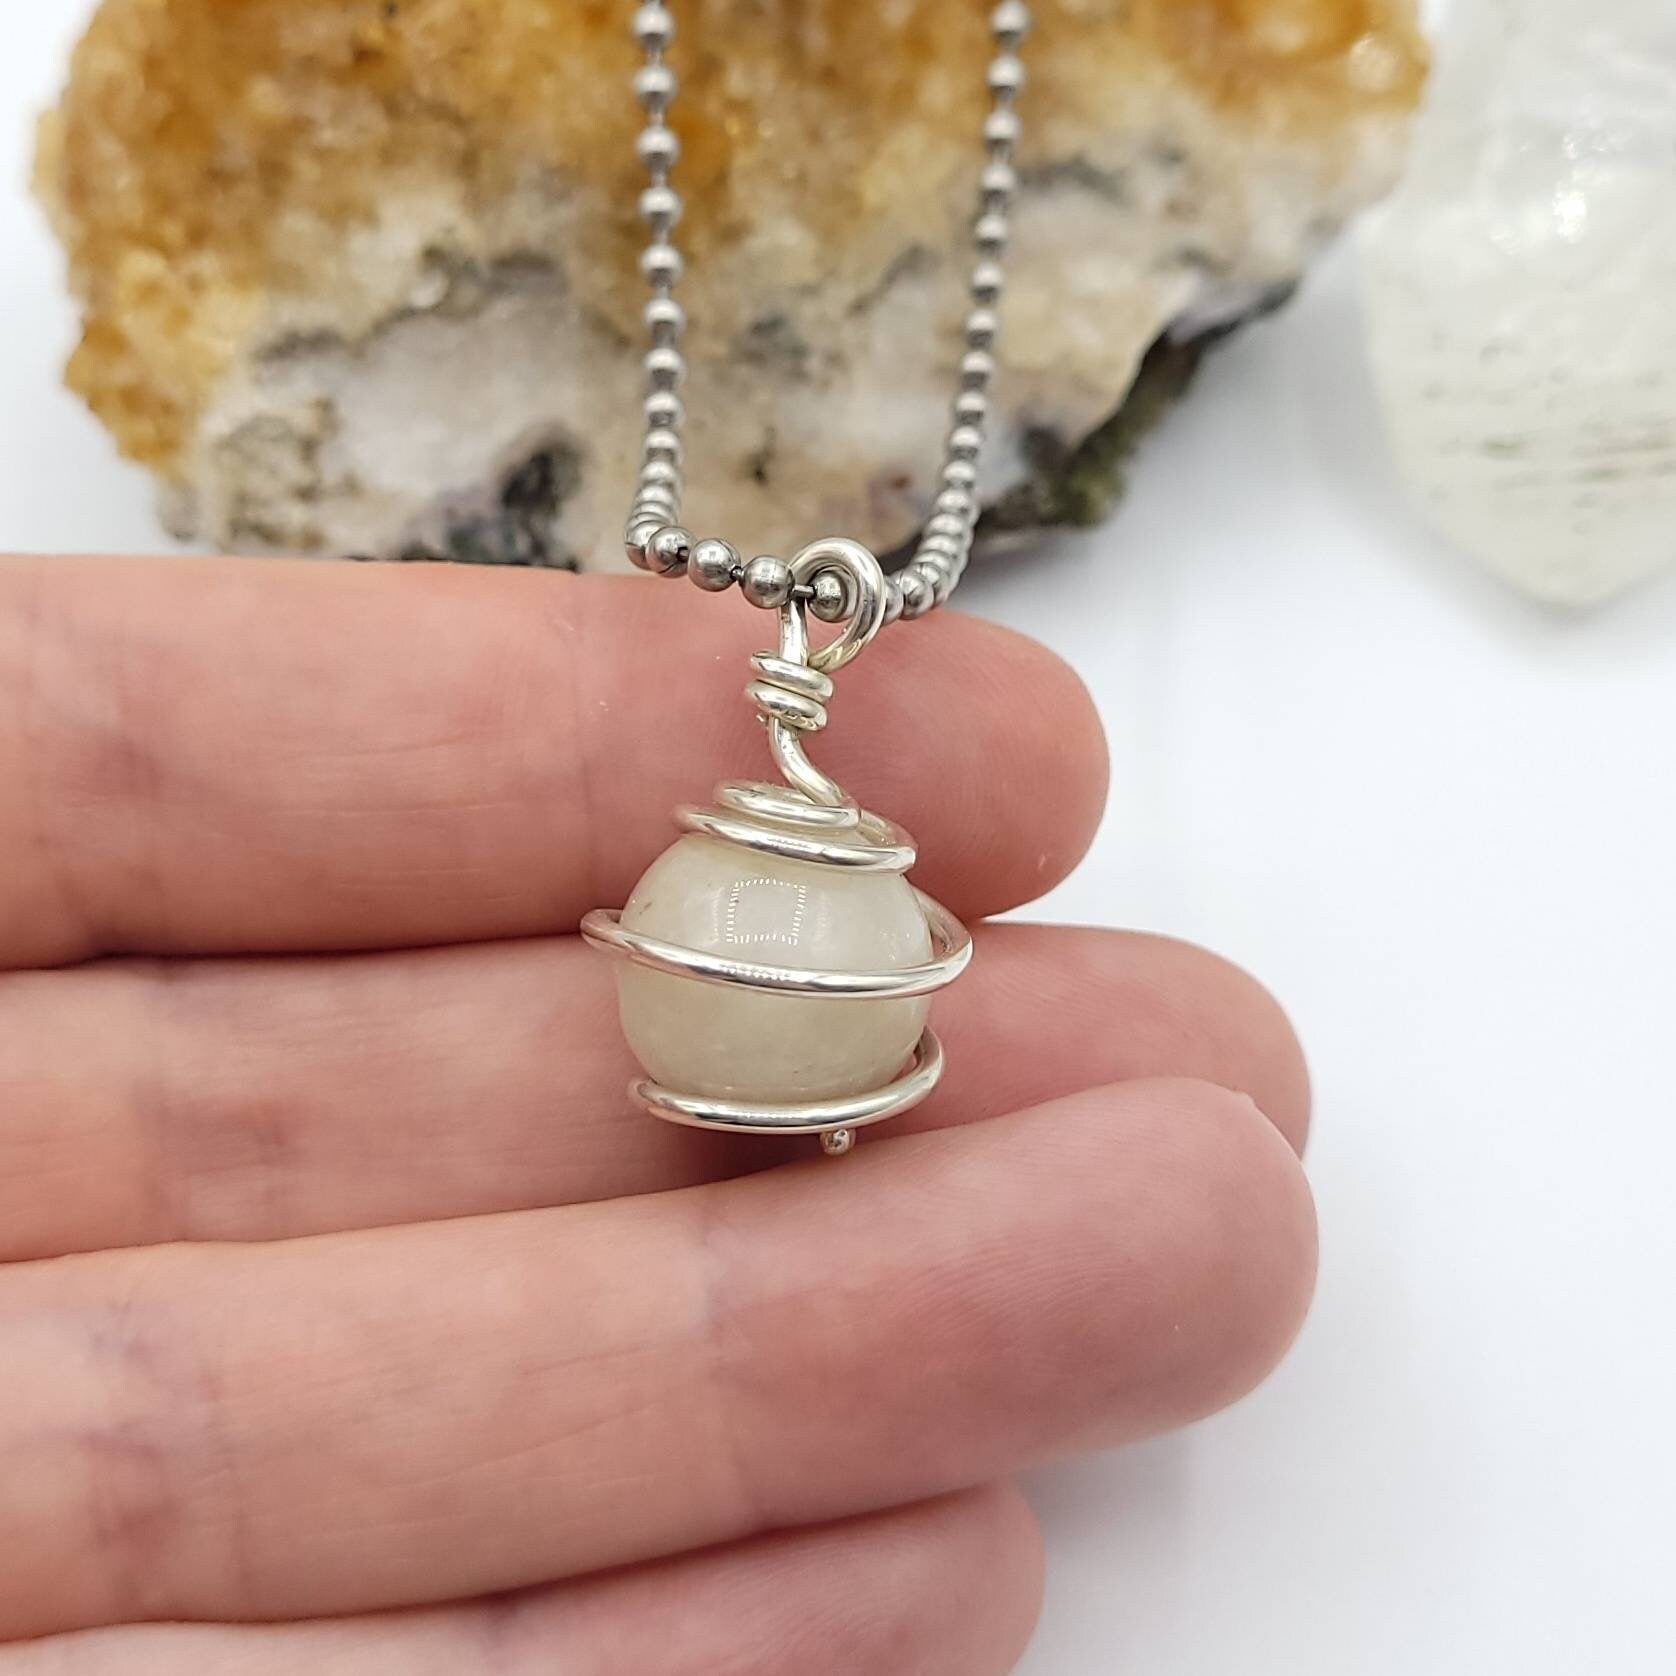 Rainbow Moonstone Sphere Necklace, Silver Wire Wrapped Moonstone Pendant